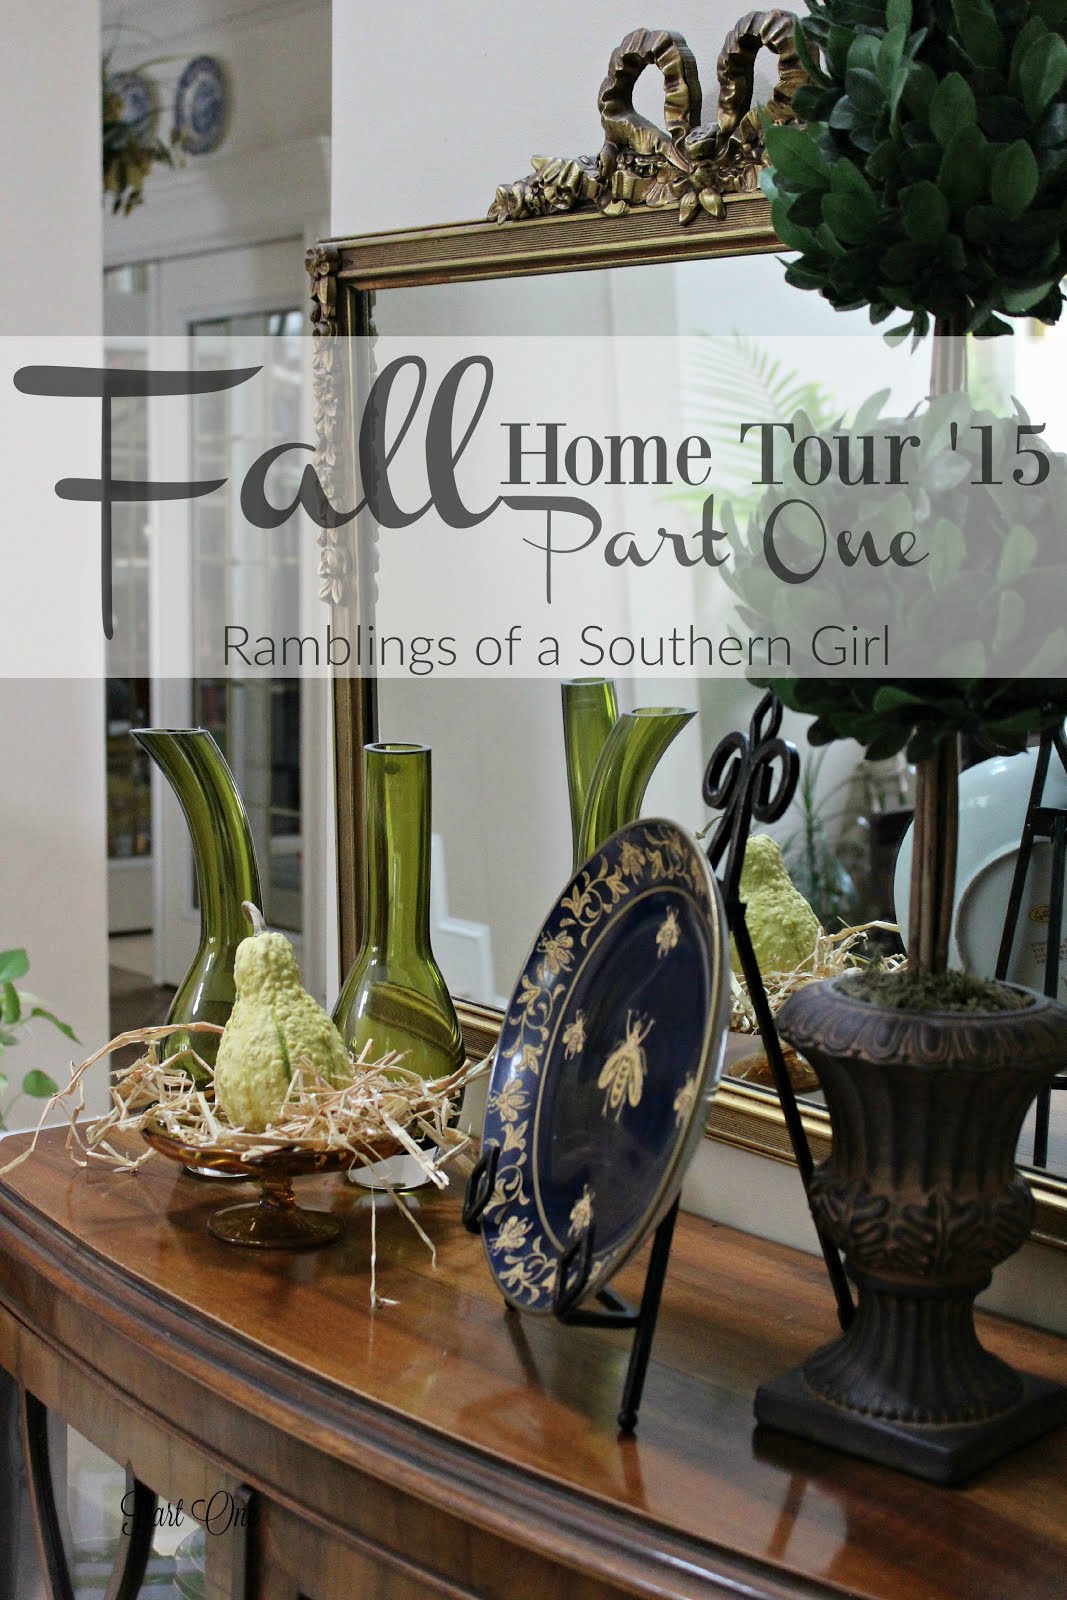 Fall Home Tour 2015 - Part One